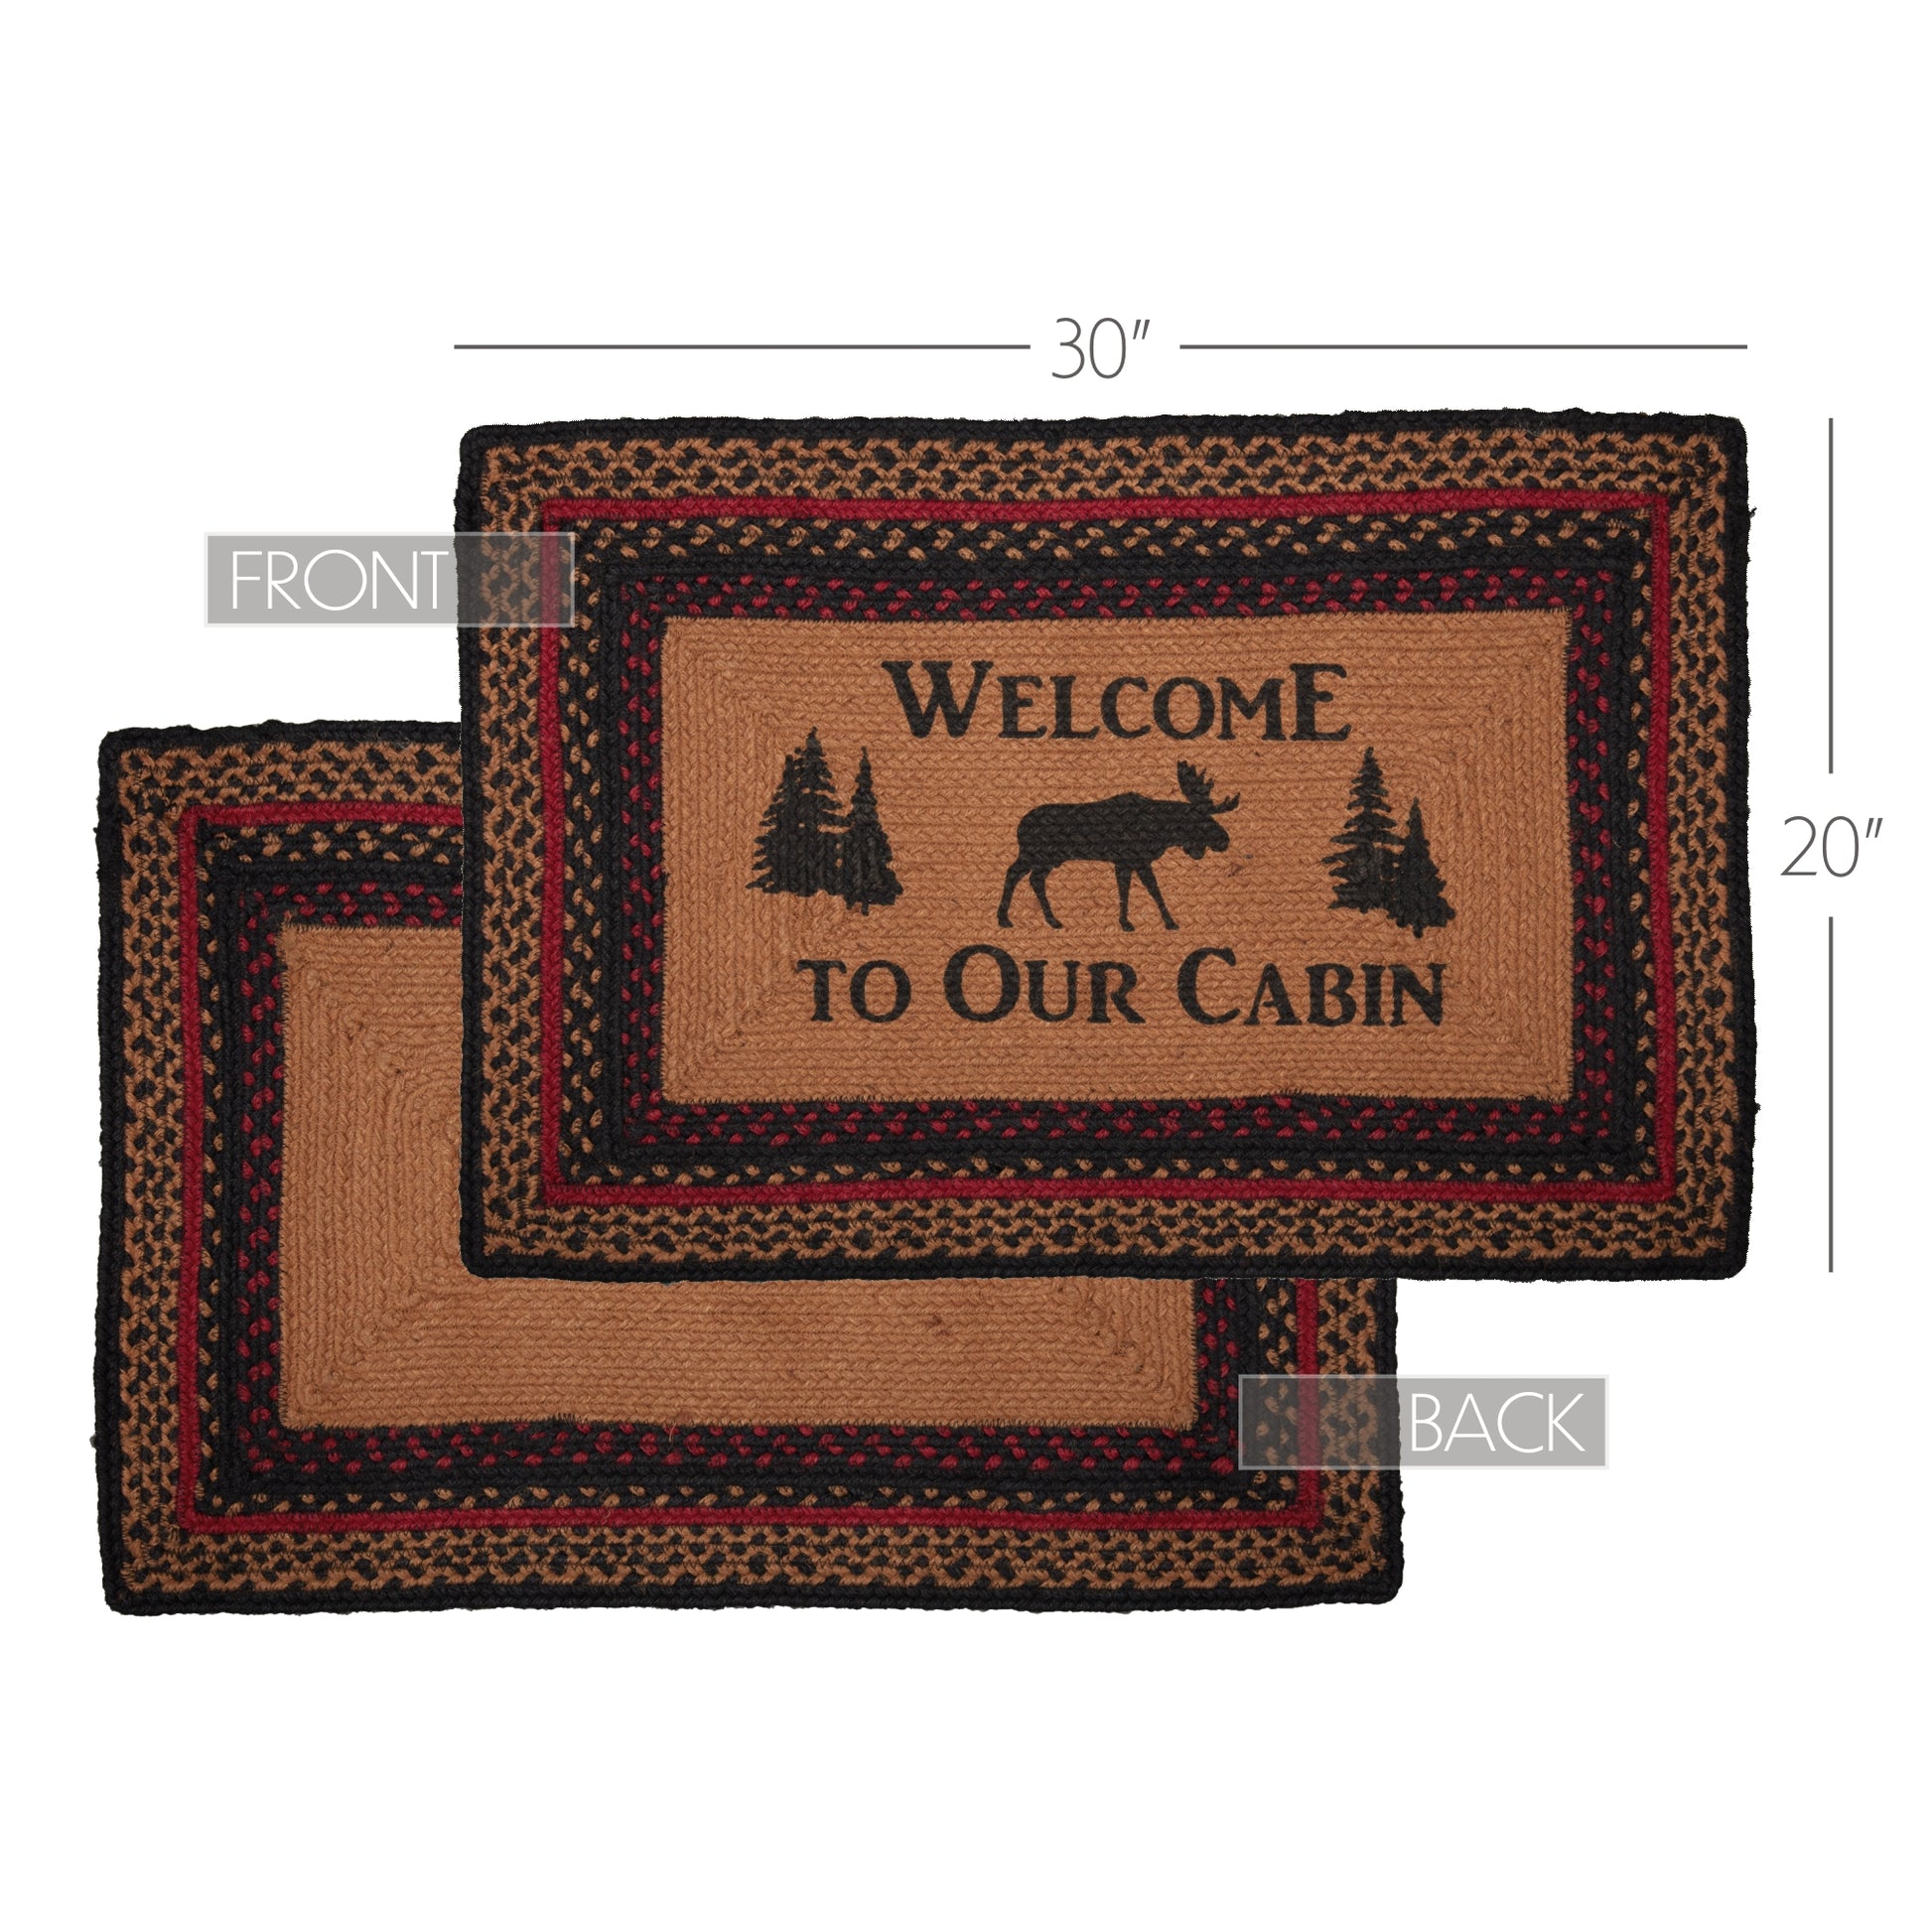 69413-Cumberland-Stenciled-Moose-Jute-Rug-Rect-Welcome-to-the-Cabin-w-Pad-20x30-image-10